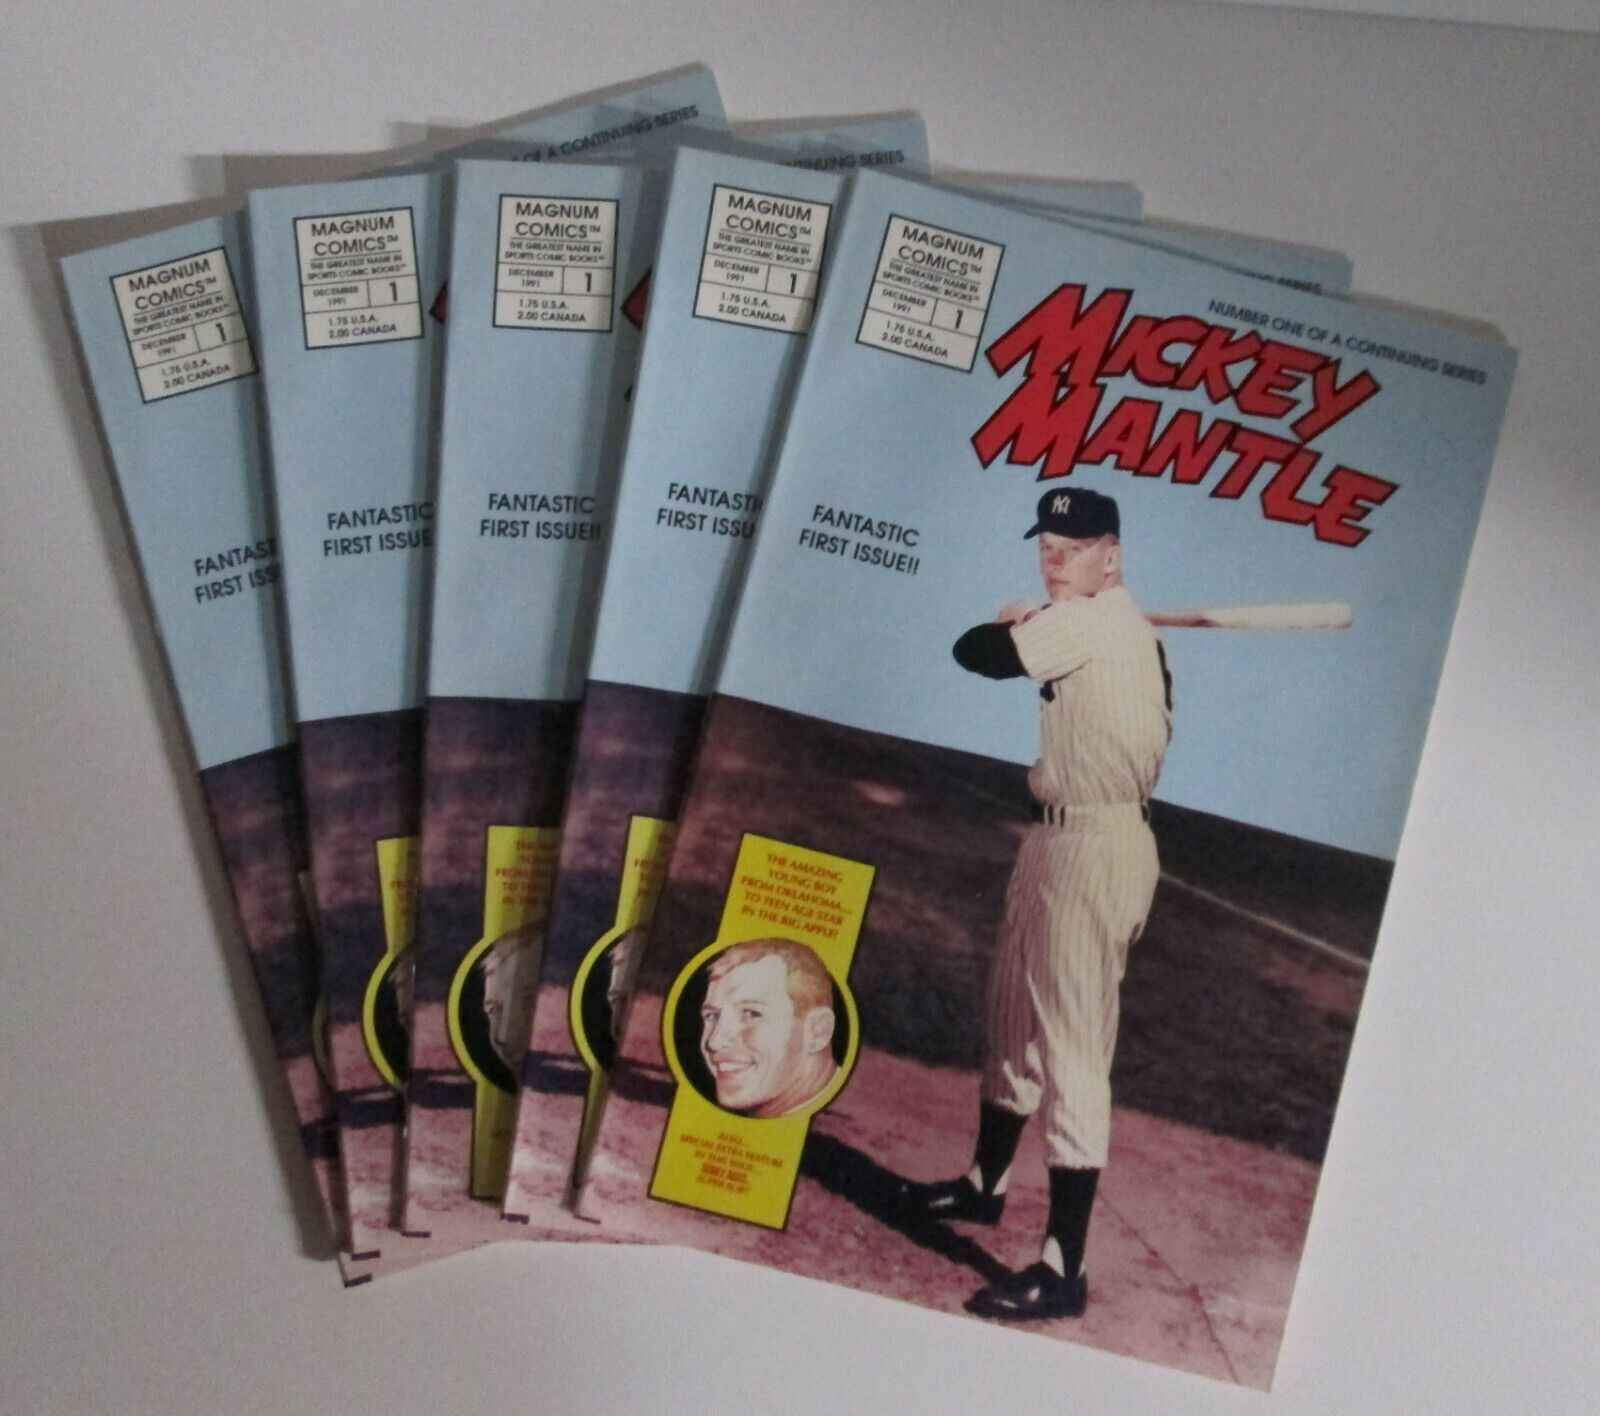 5-1991 Mickey Mantle Comic Books #1 Magnum 1st Issue Brand New New York Yankees